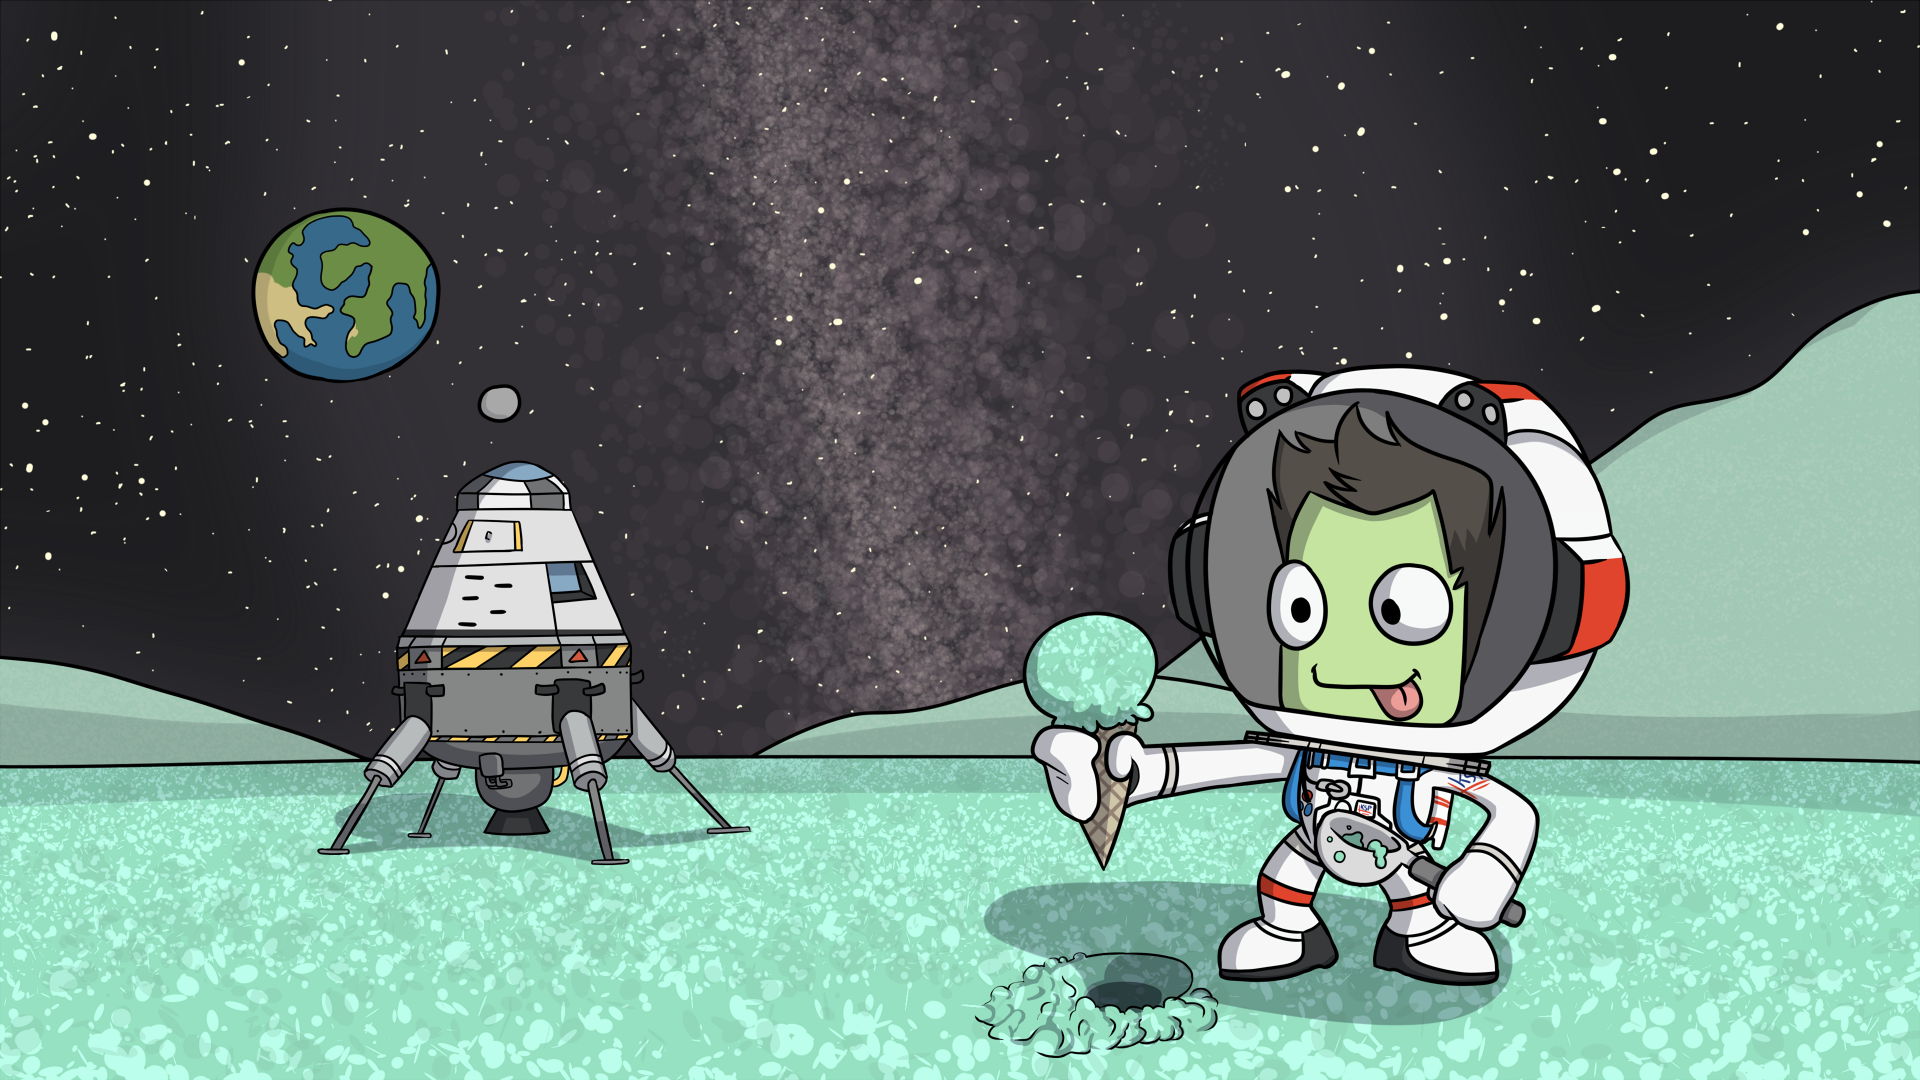 minmus_treat_by_y0rshee-d8qp0rx.png